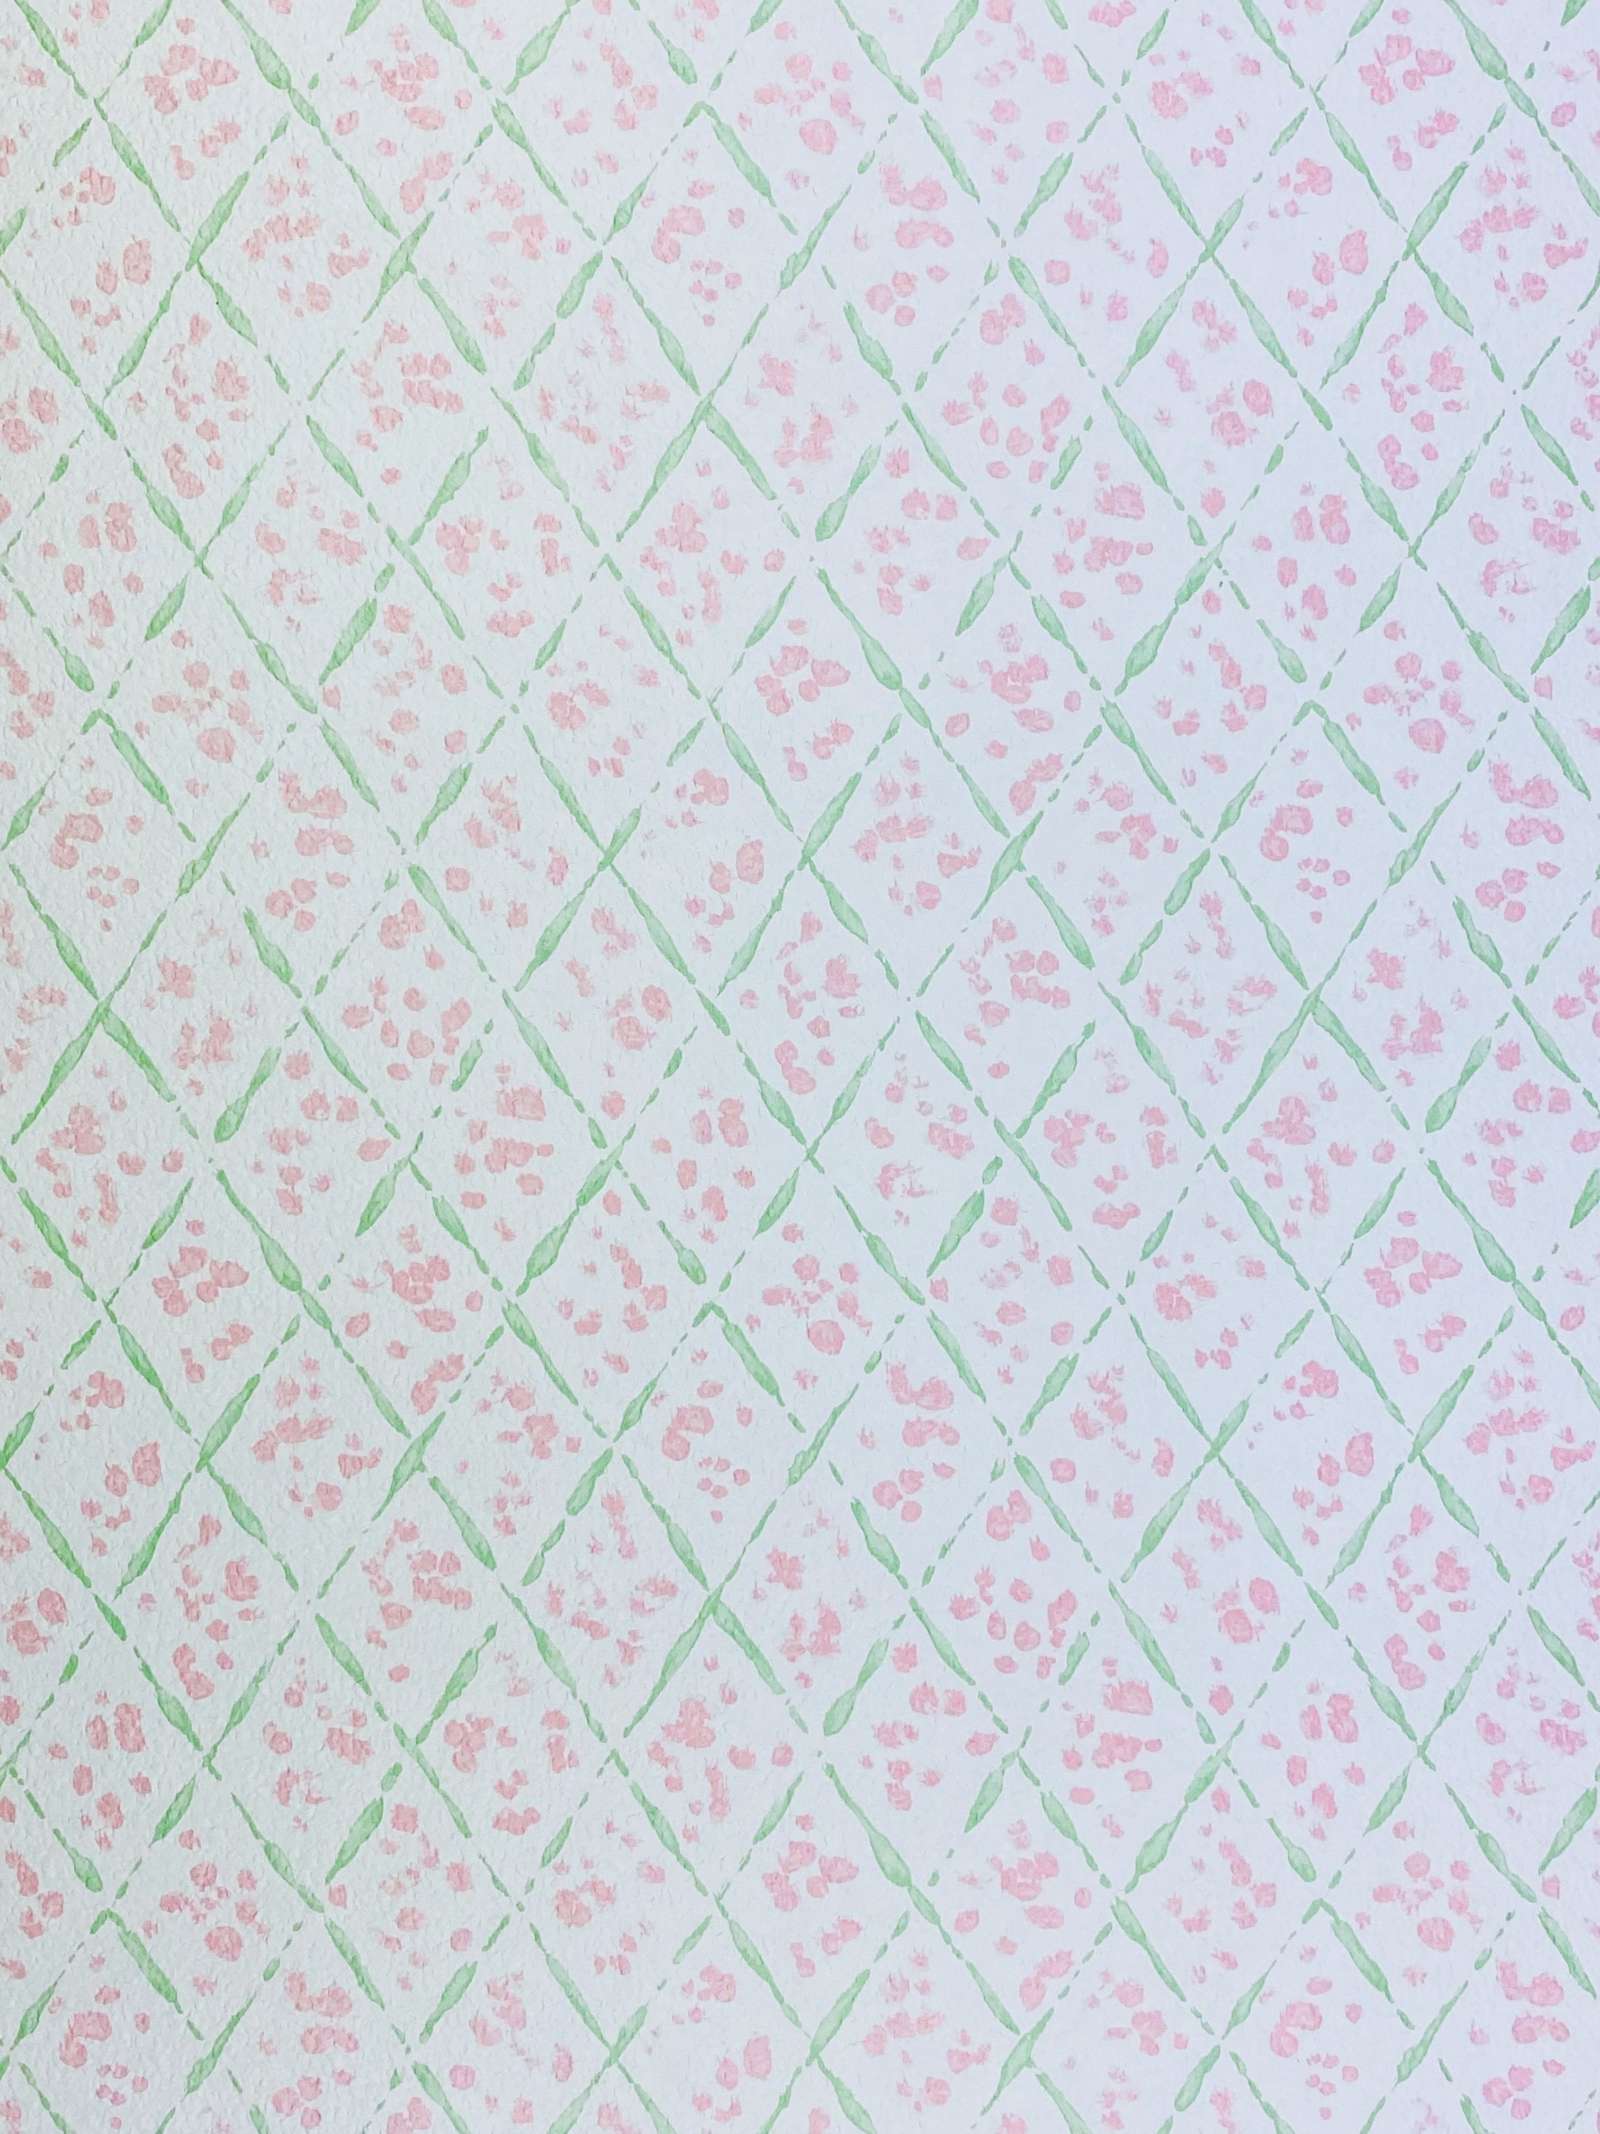 Pink Checkered Wallpapers